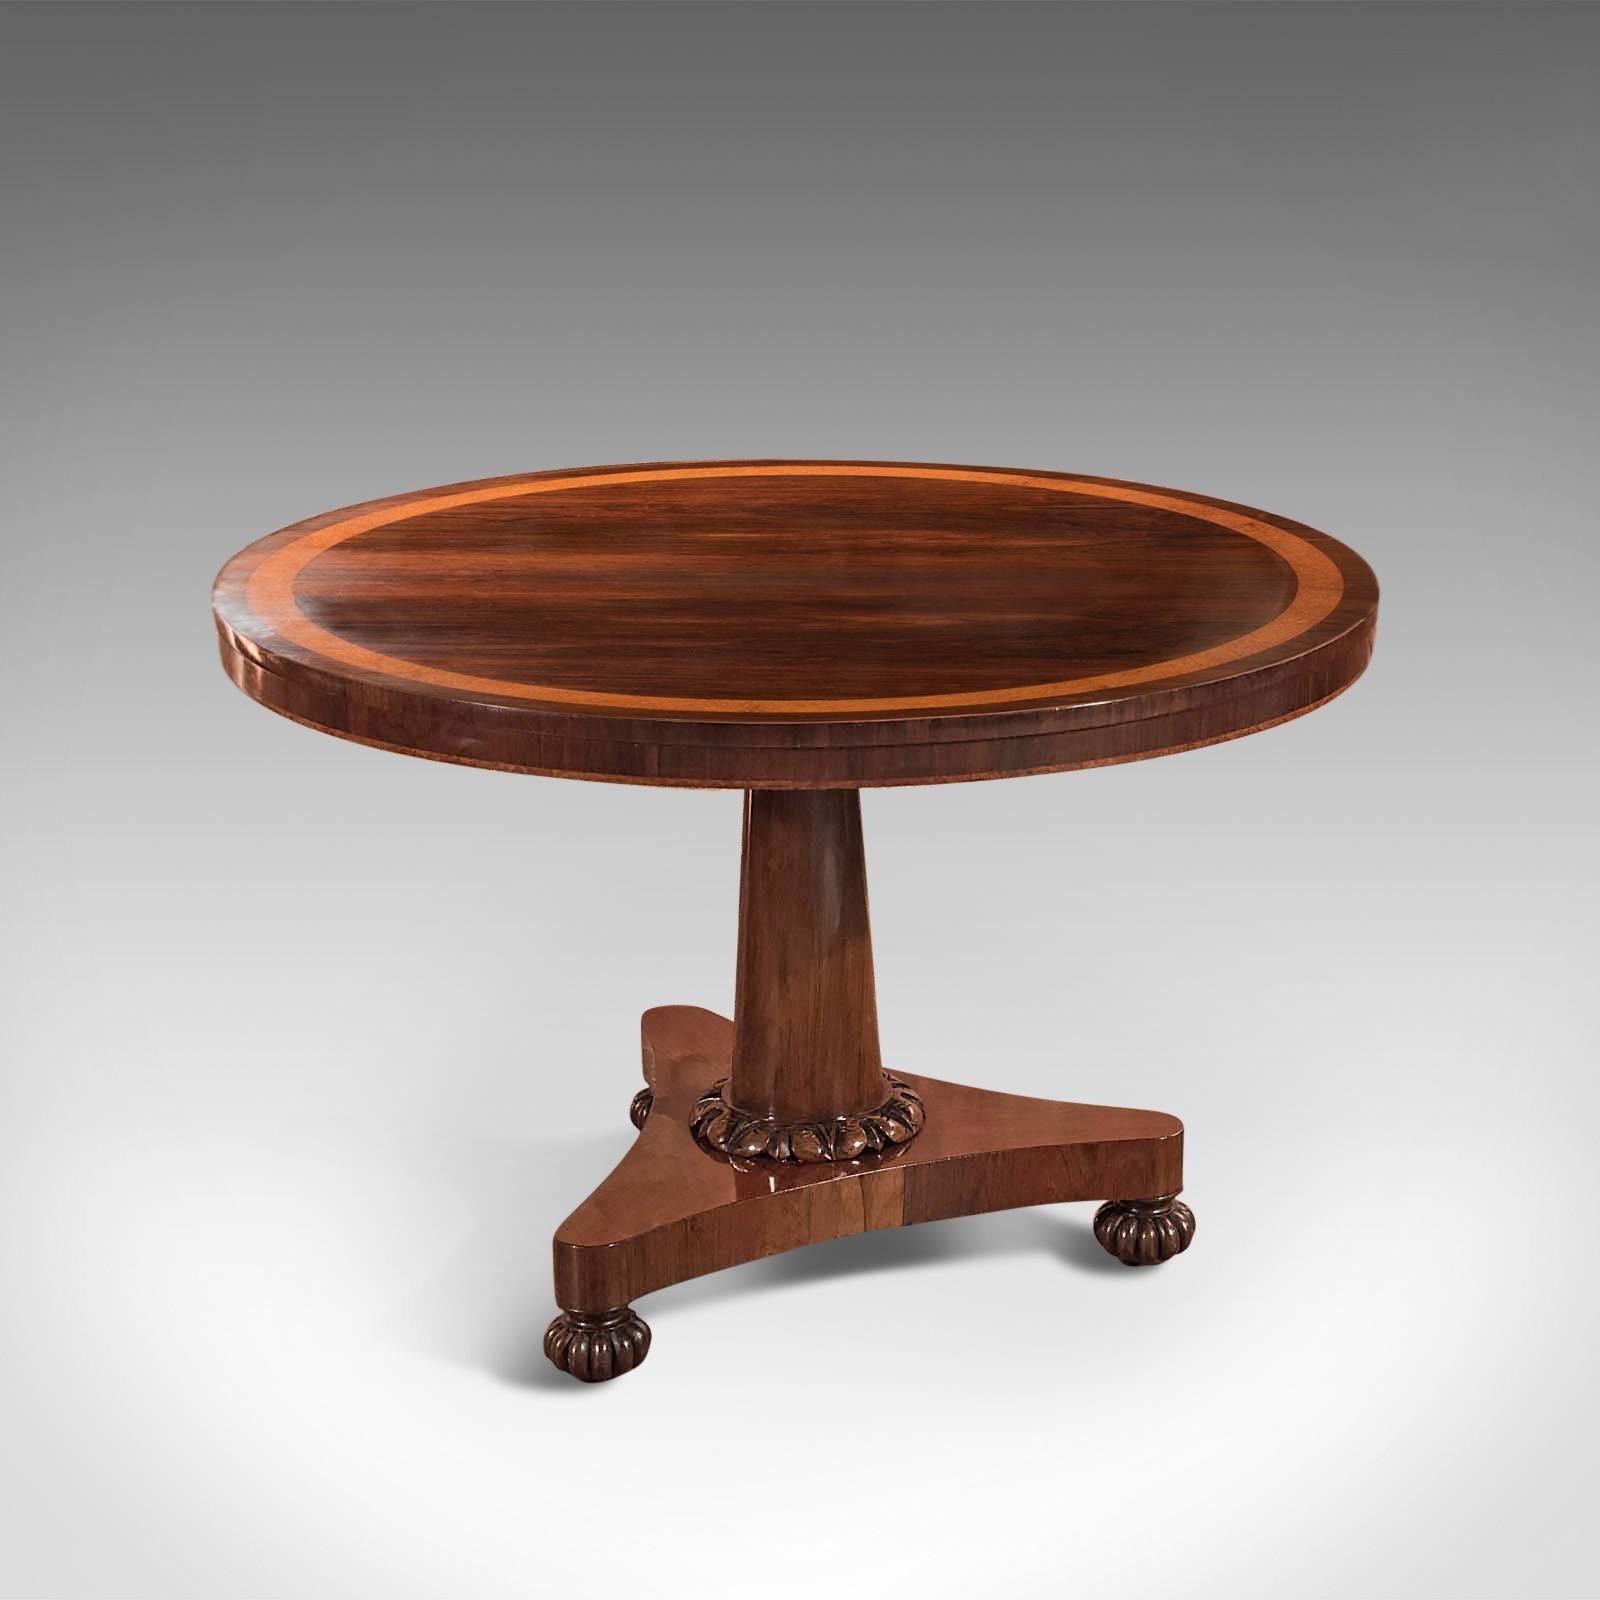 This is an antique, William IV rosewood, tilt-top breakfast table dating to circa 1830.

Heralding from the late Regency period, this superior table modestly displays the excesses of top quality timber through a highly polished